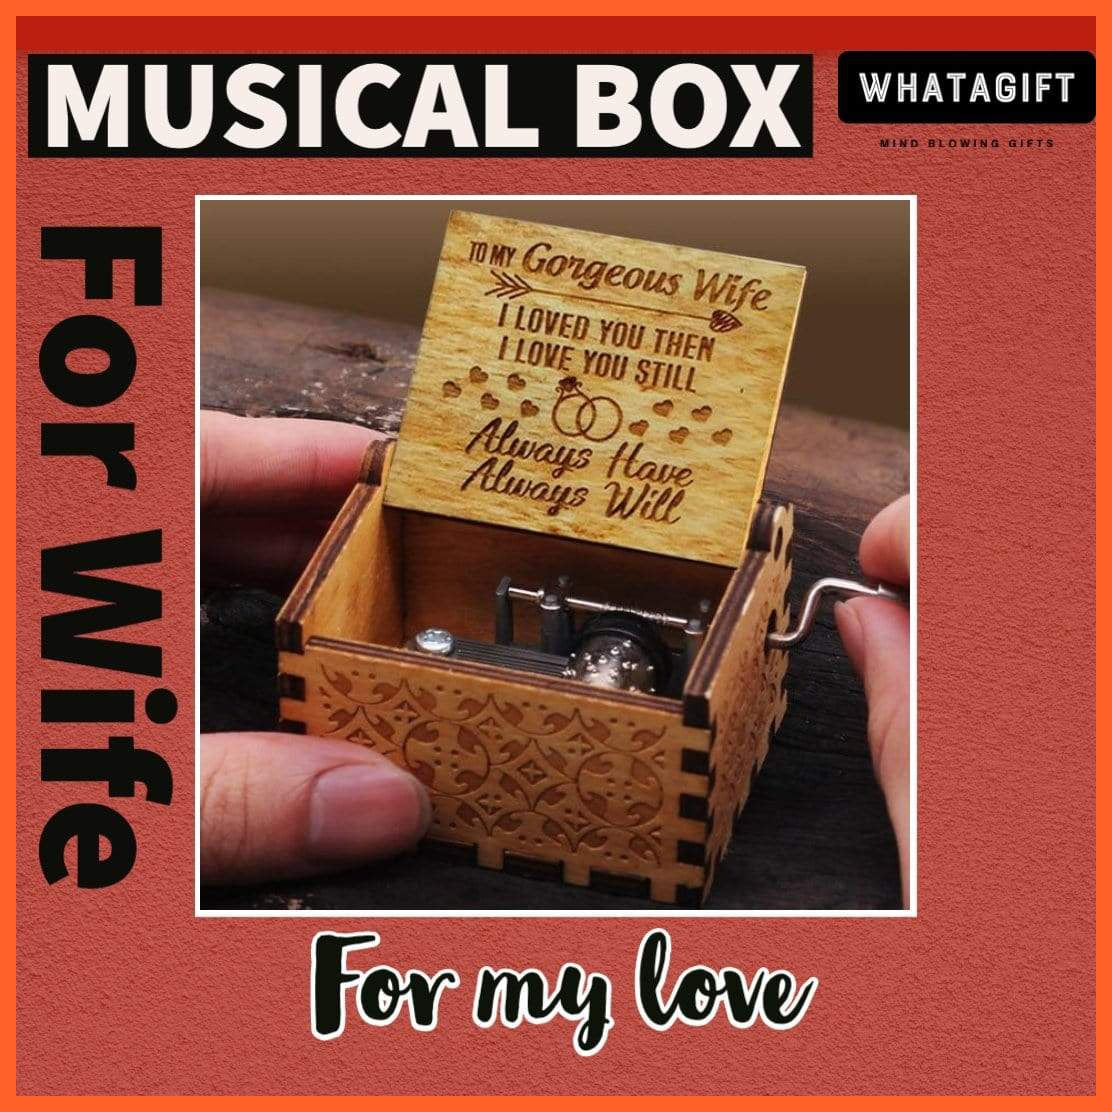 Wooden Classical Music Box For Gorgeous Wife | whatagift.com.au.